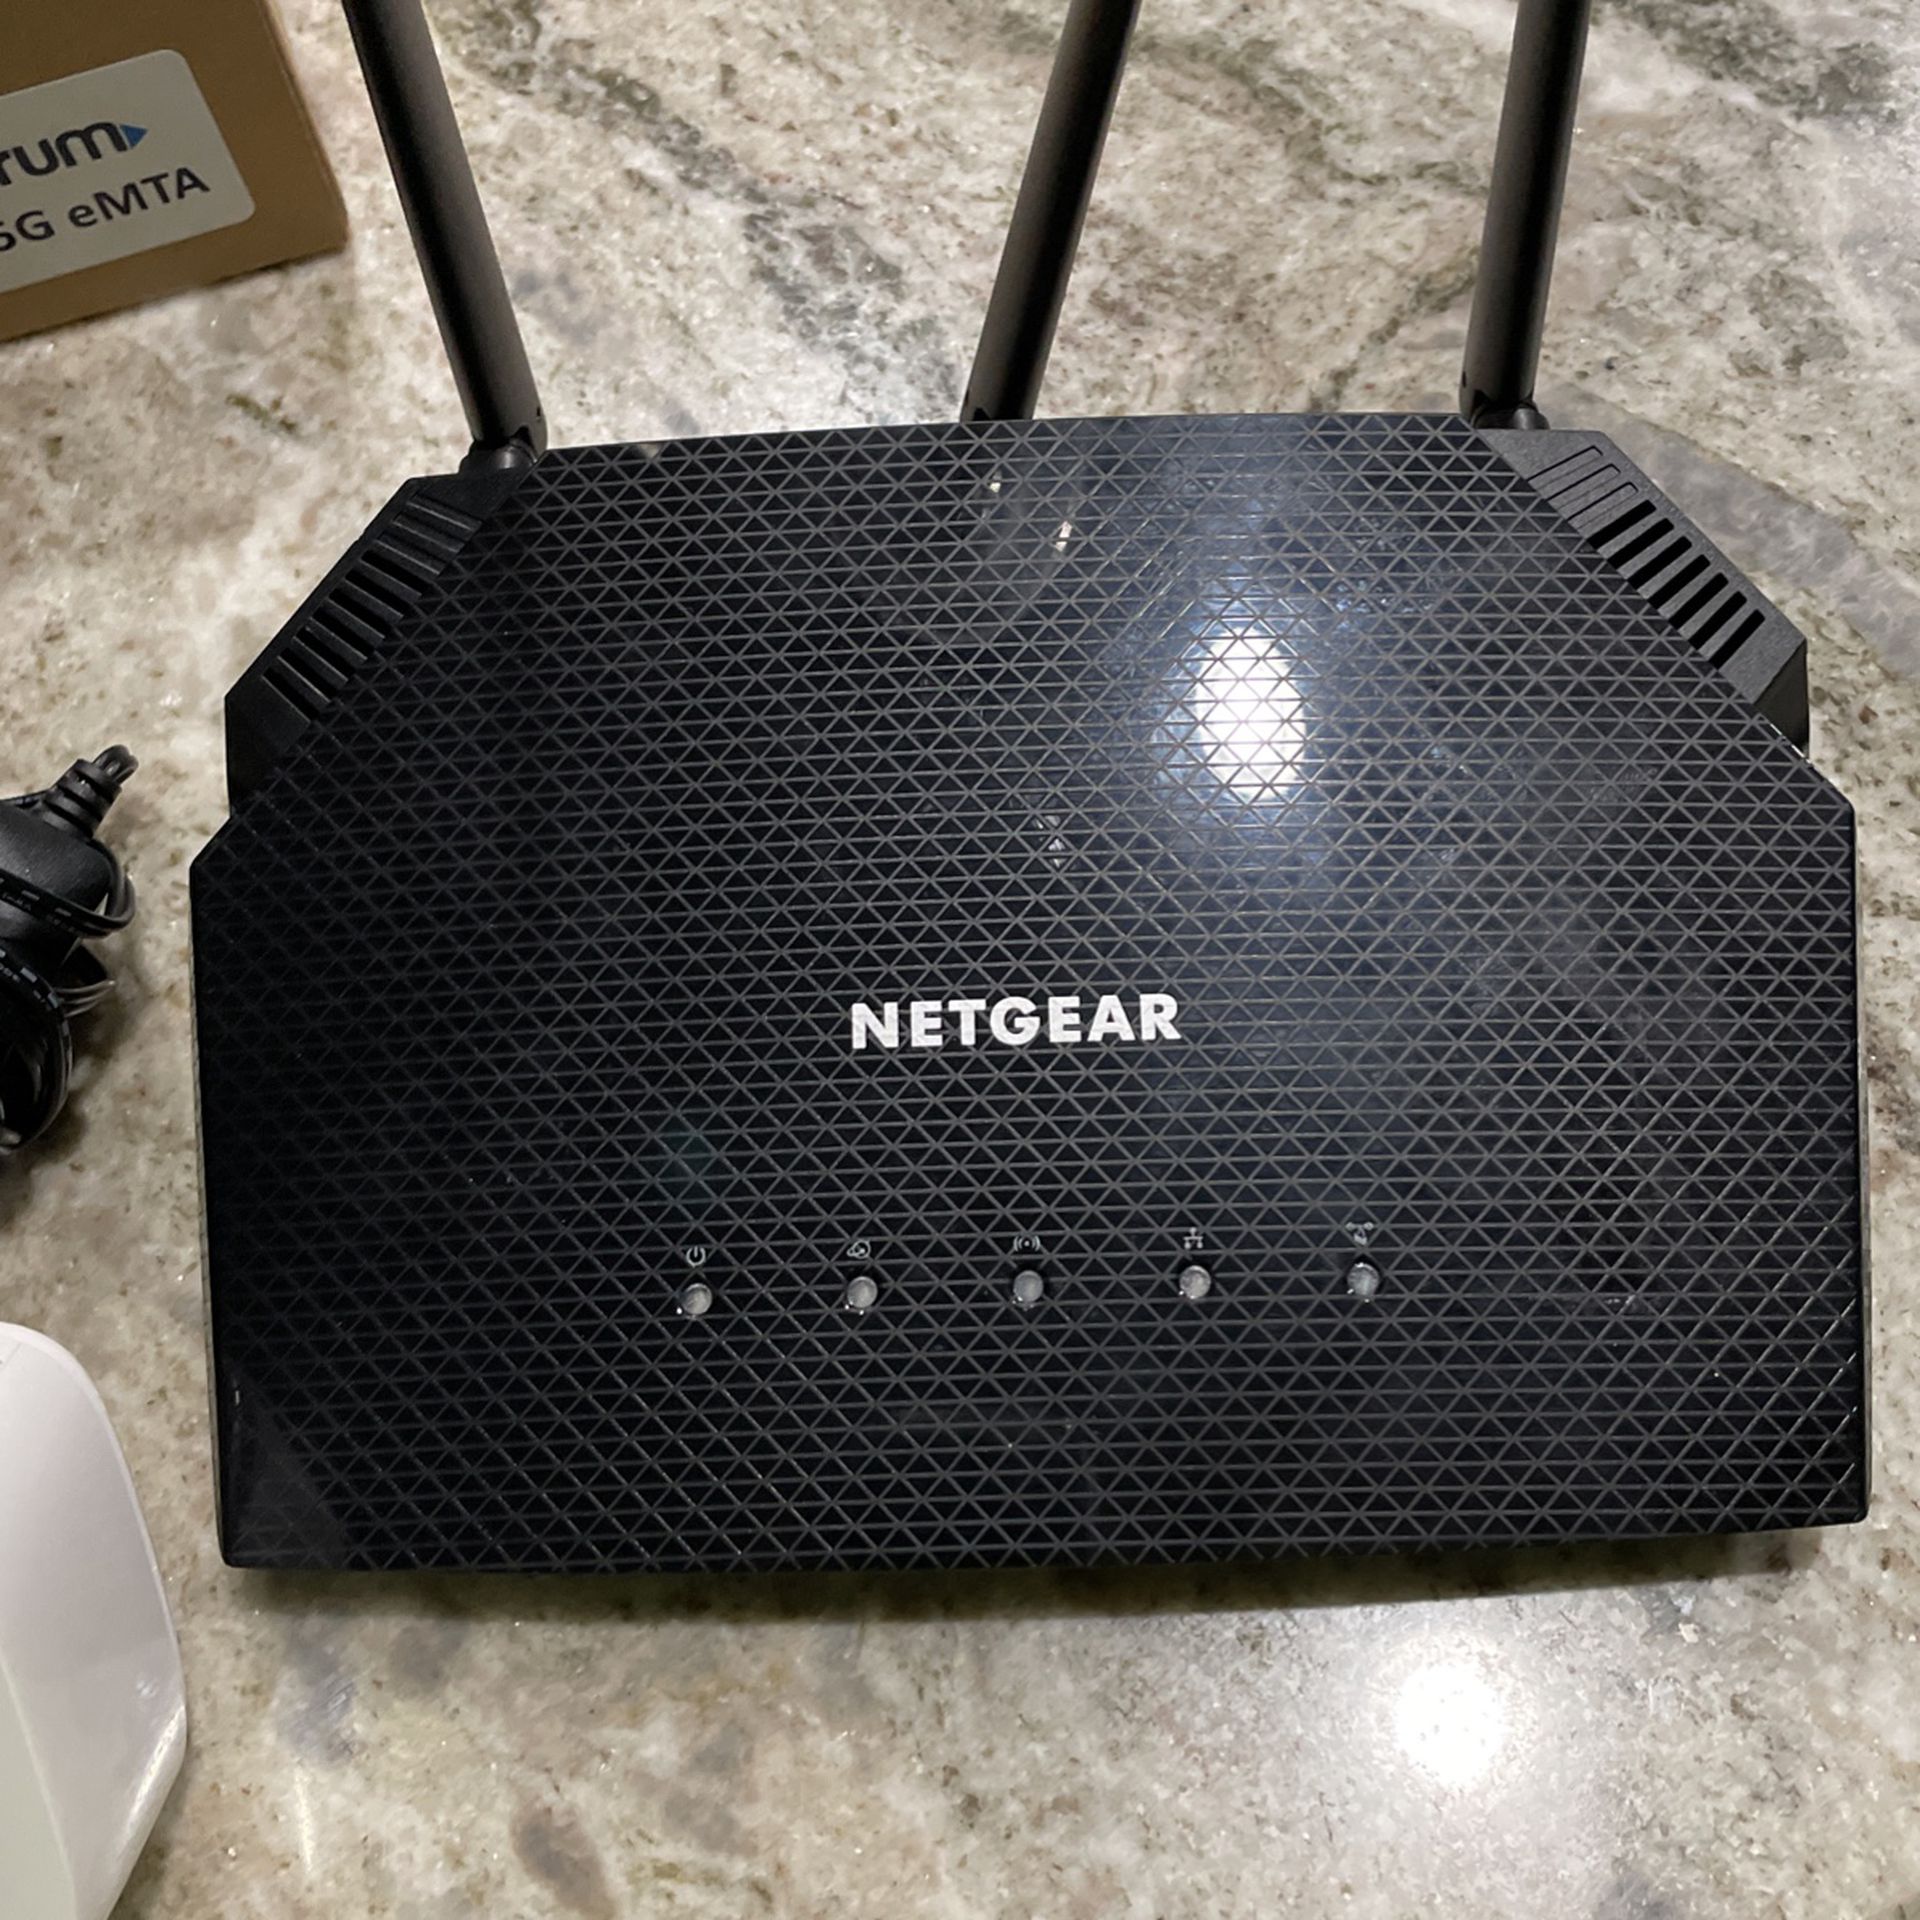 Net gear Router And Extender 